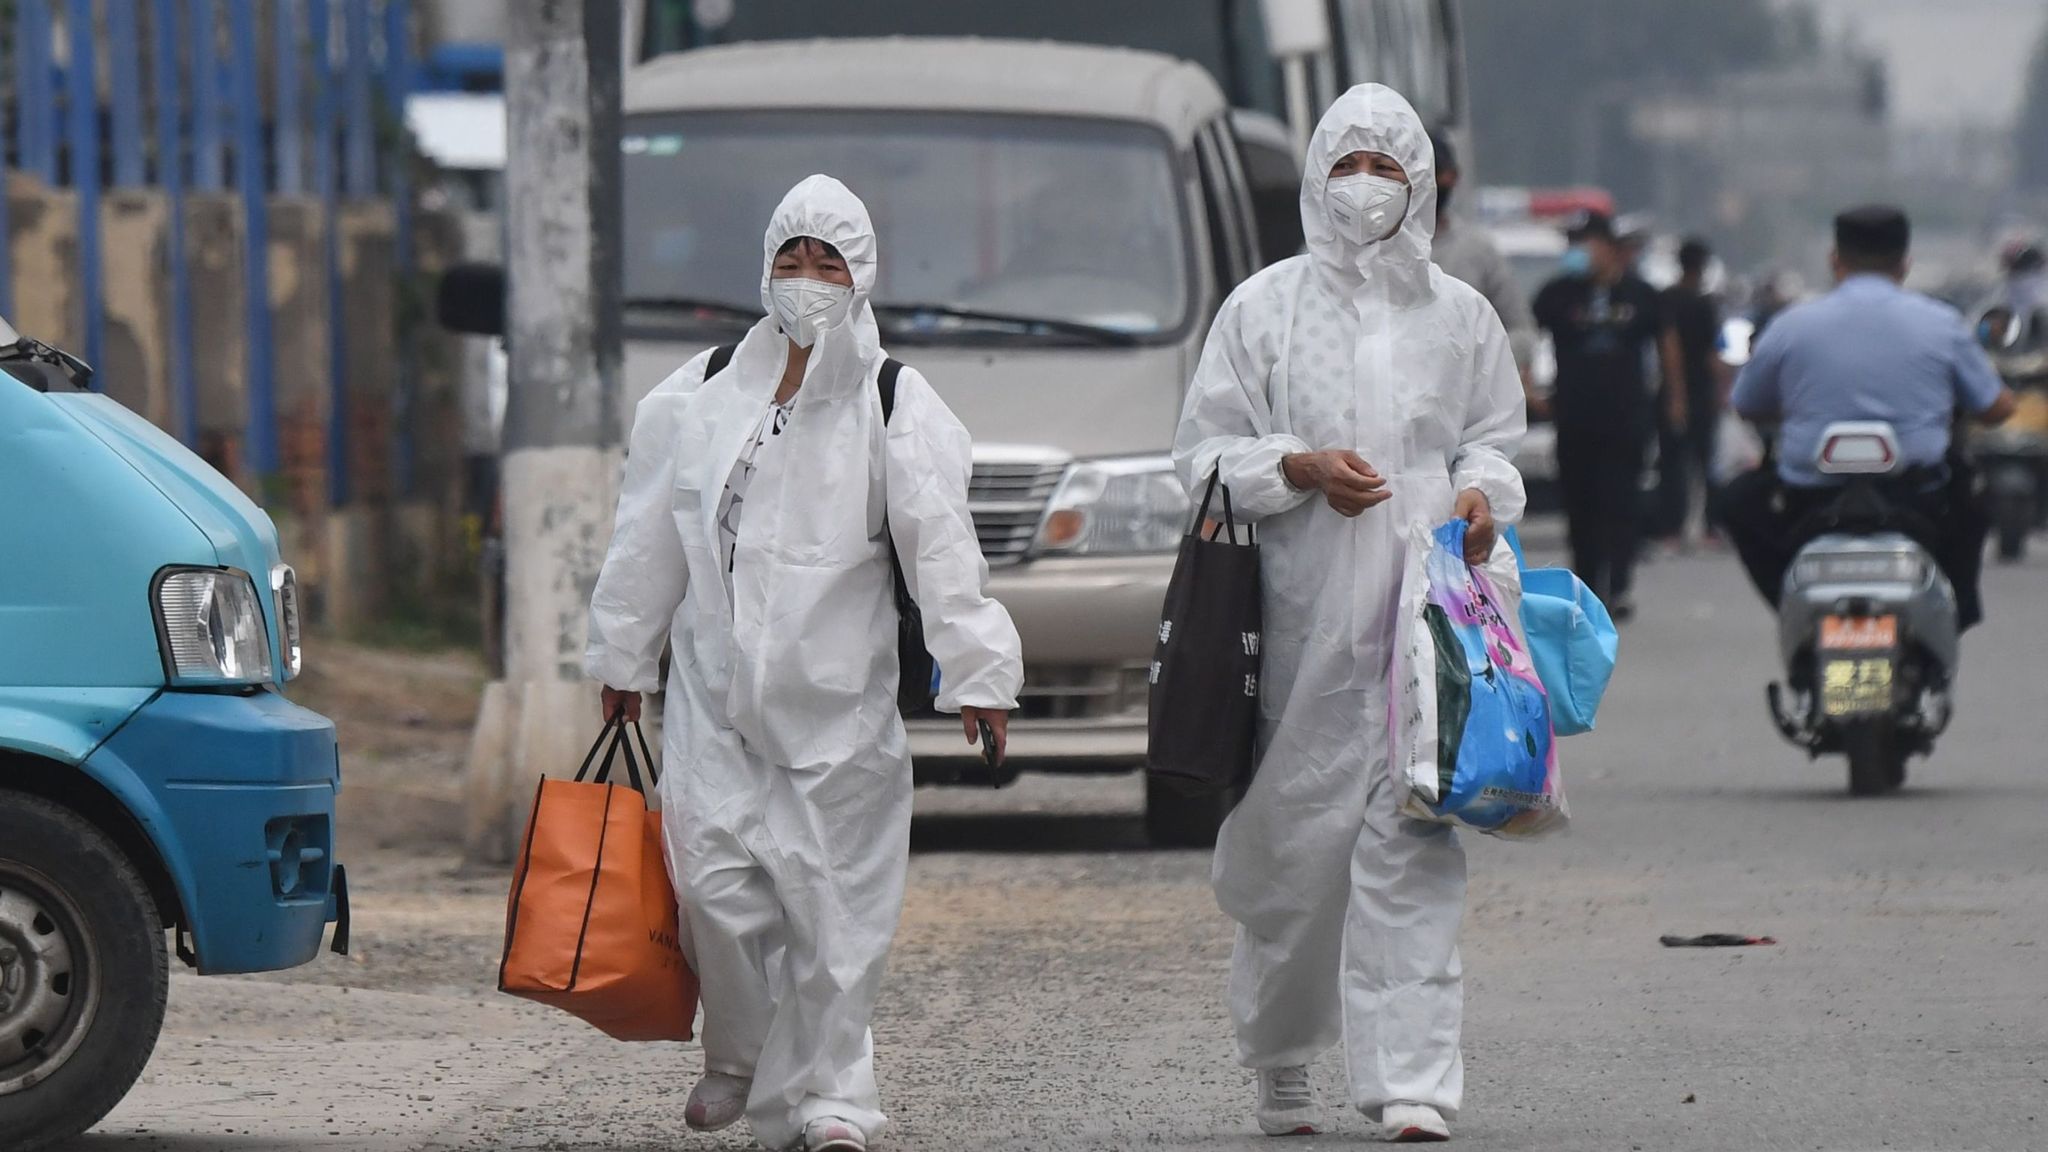 Coronavirus: Beijing shuts food market and goes into 'wartime emergency mode'  after spike in COVID-19 cases | World News | Sky News